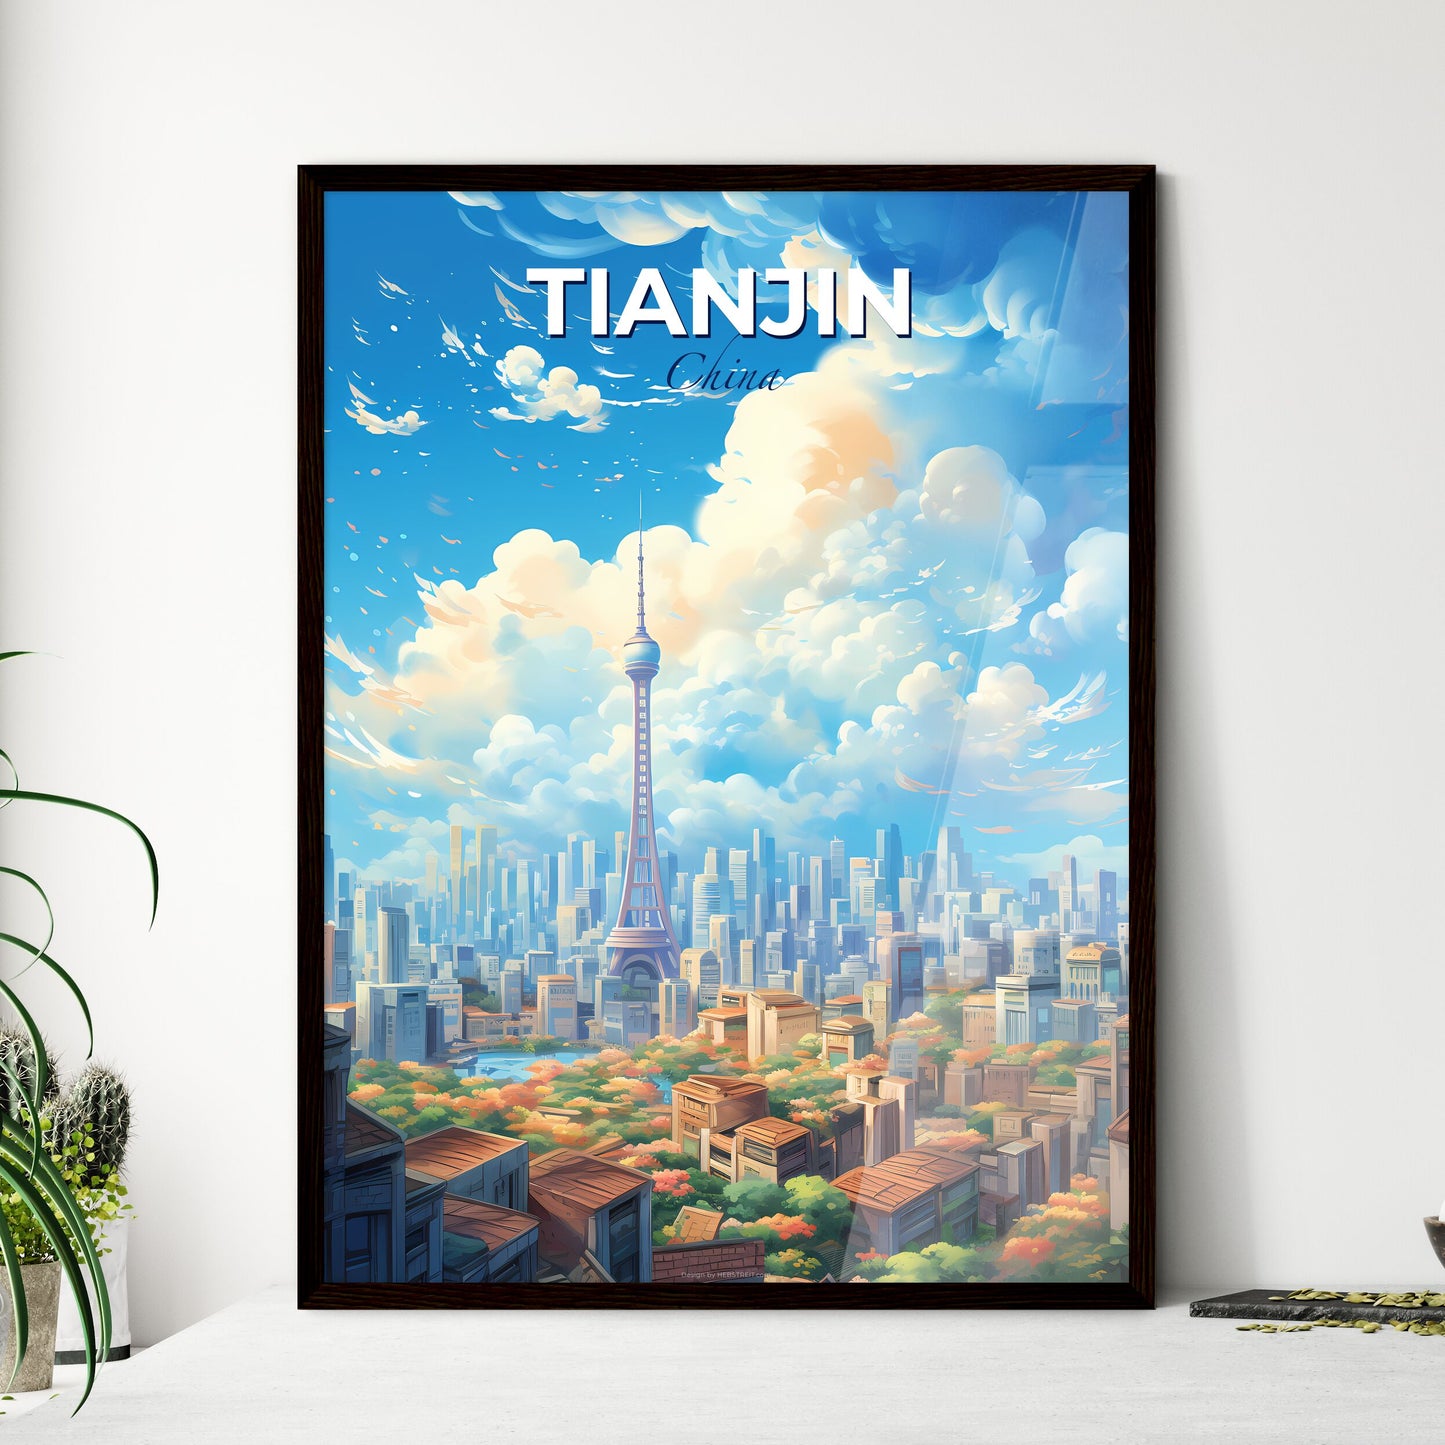 Tianjin China Skyline - A Cityscape With A Tower In The Distance - Customizable Travel Gift Default Title